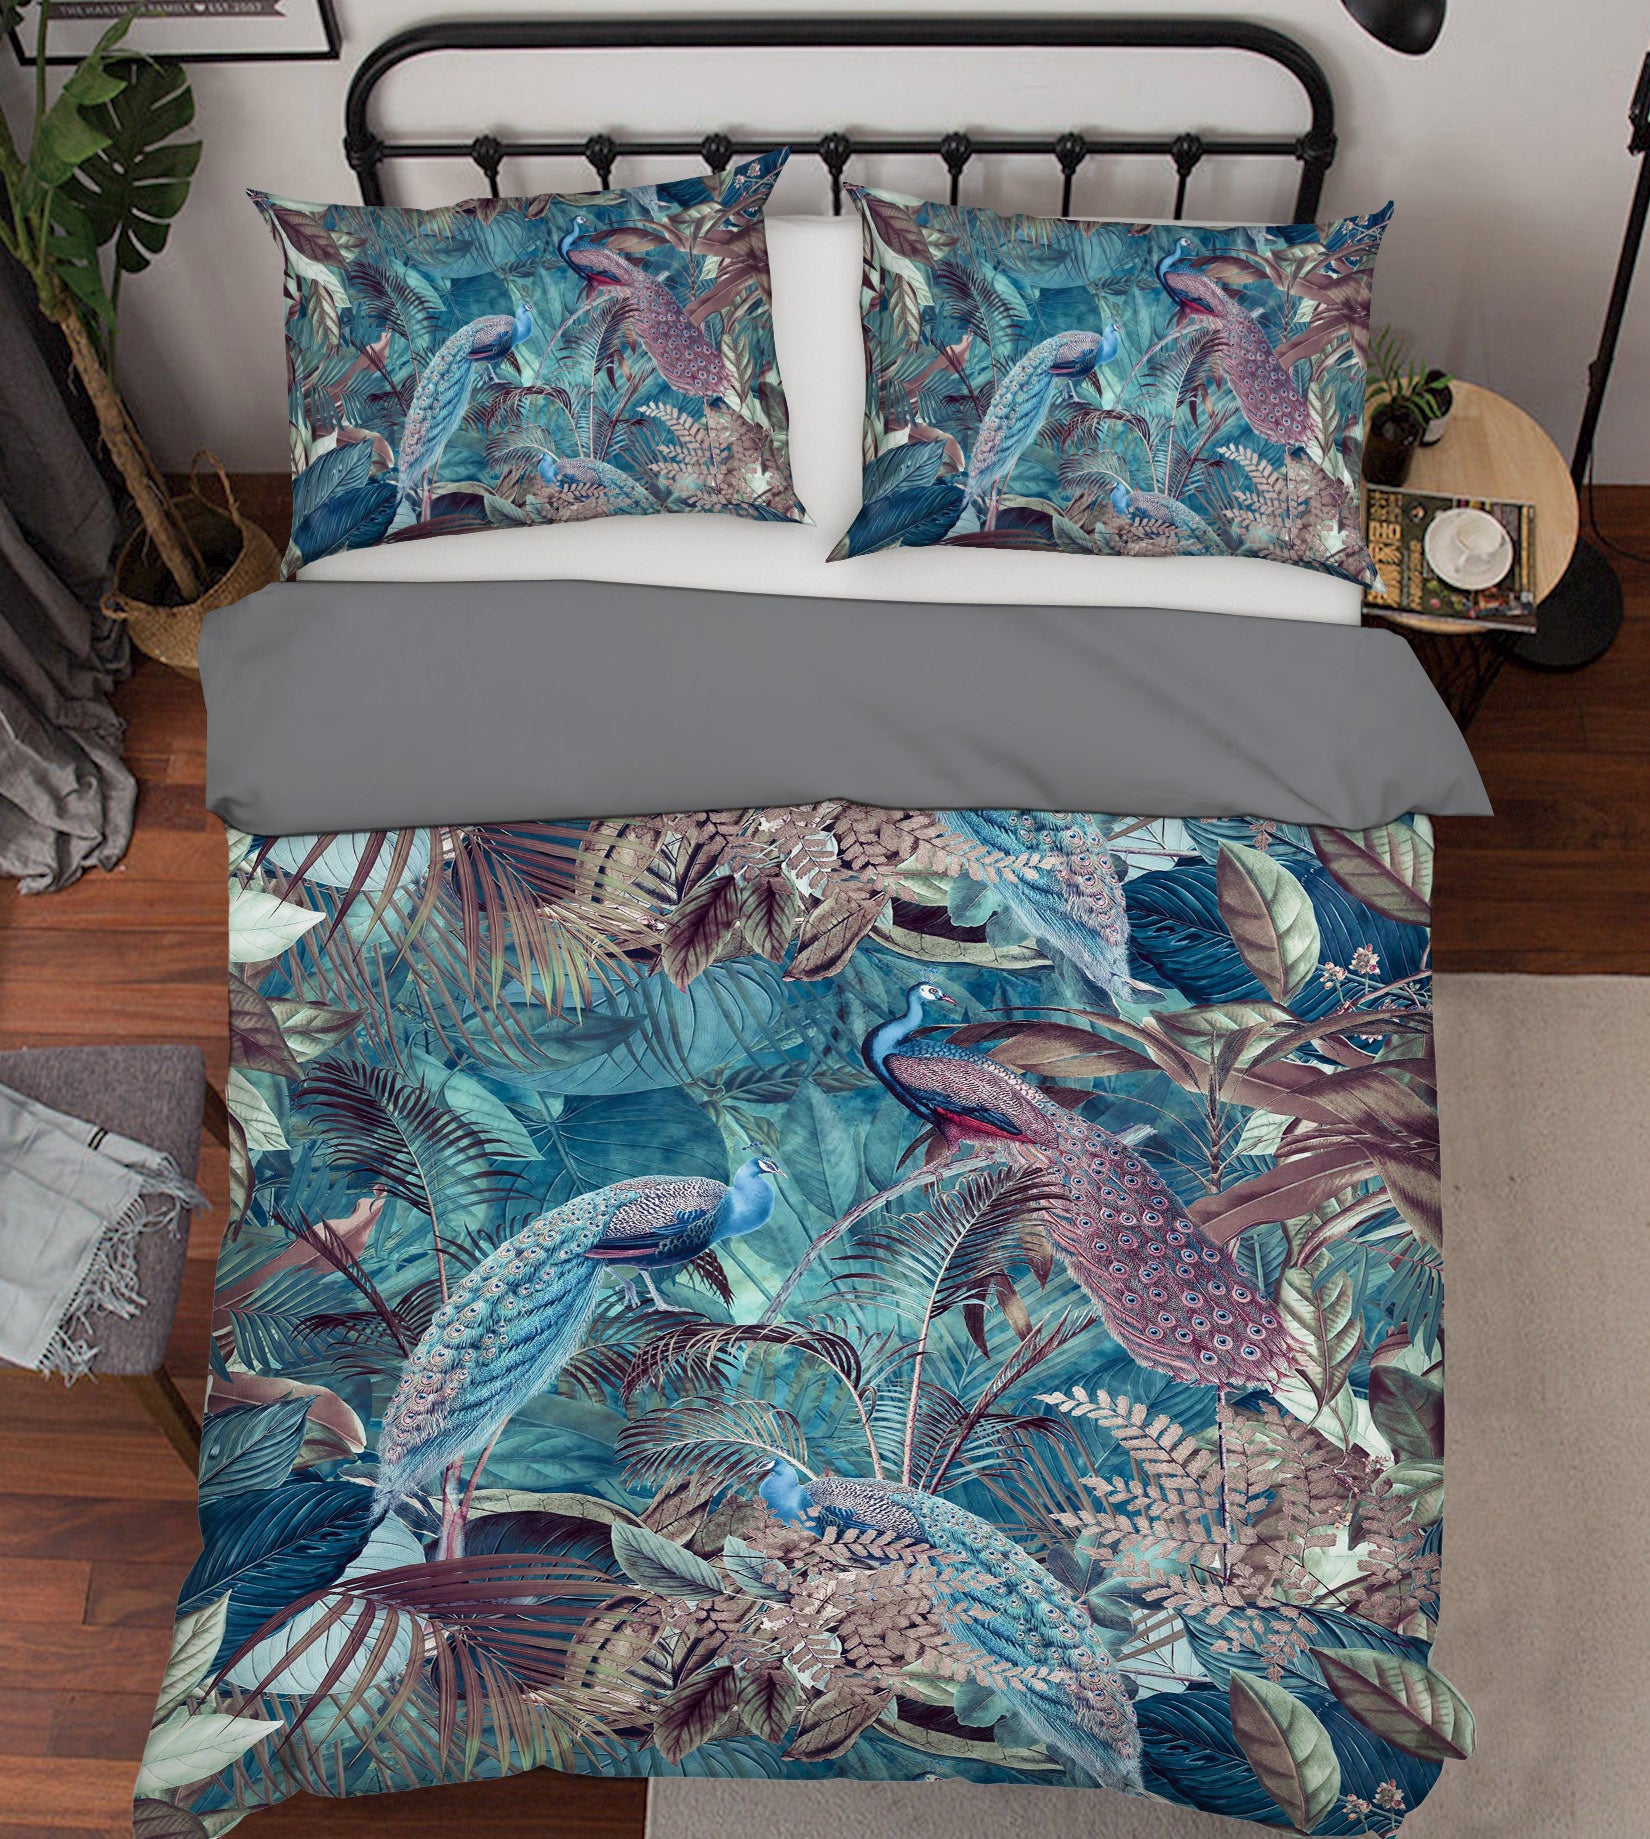 3D Night Peacock 113 Andrea haase Bedding Bed Pillowcases Quilt